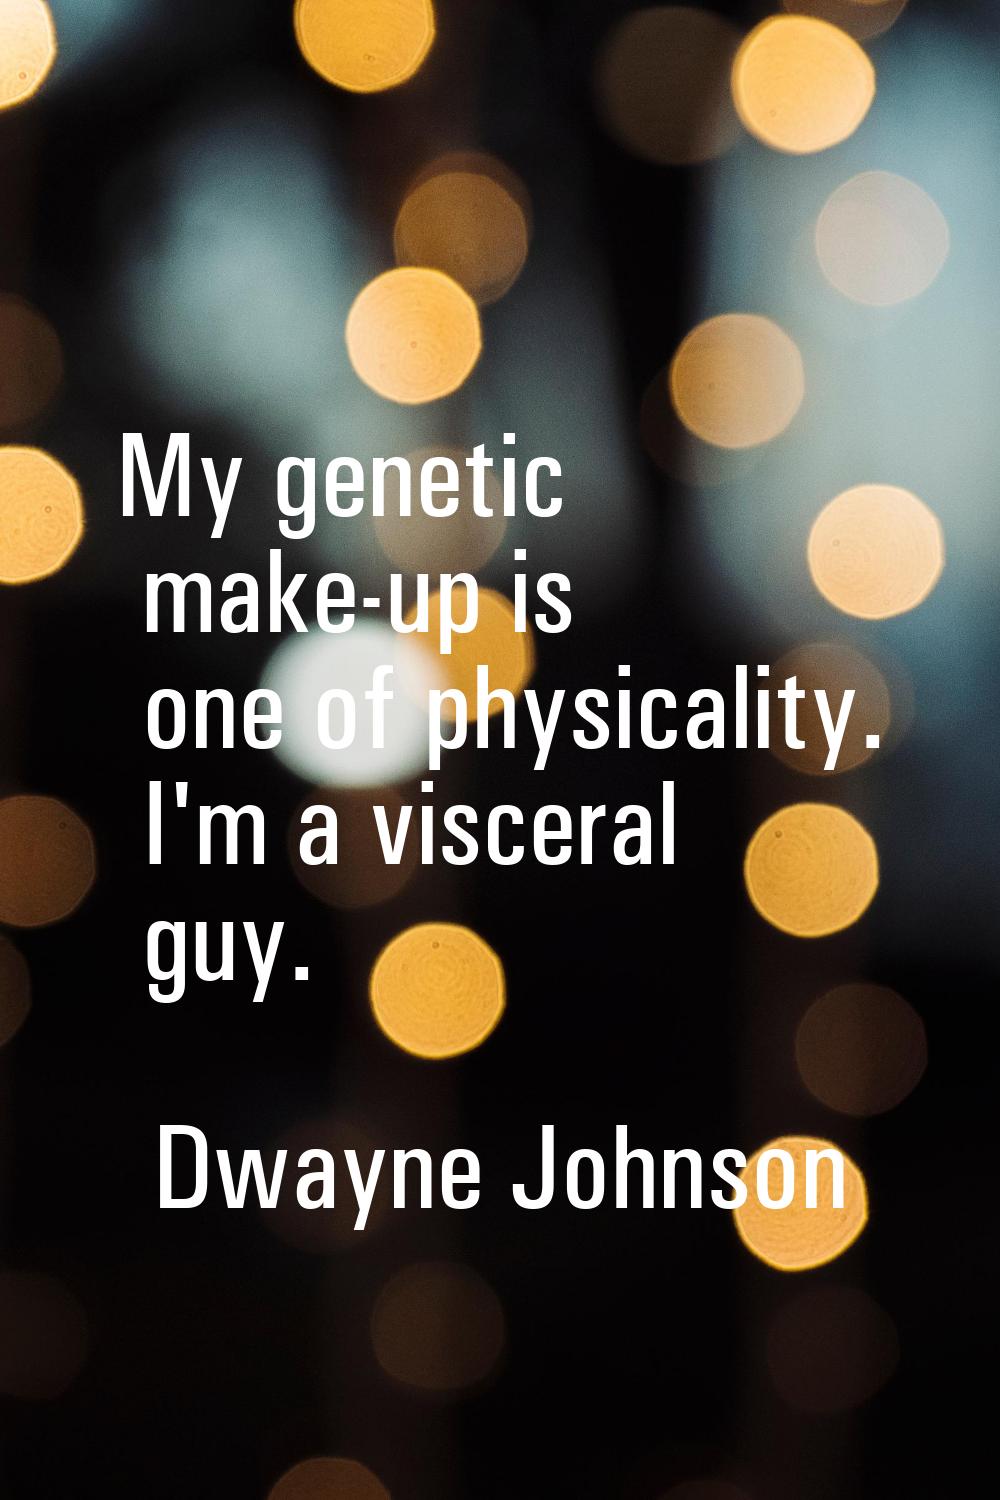 My genetic make-up is one of physicality. I'm a visceral guy.